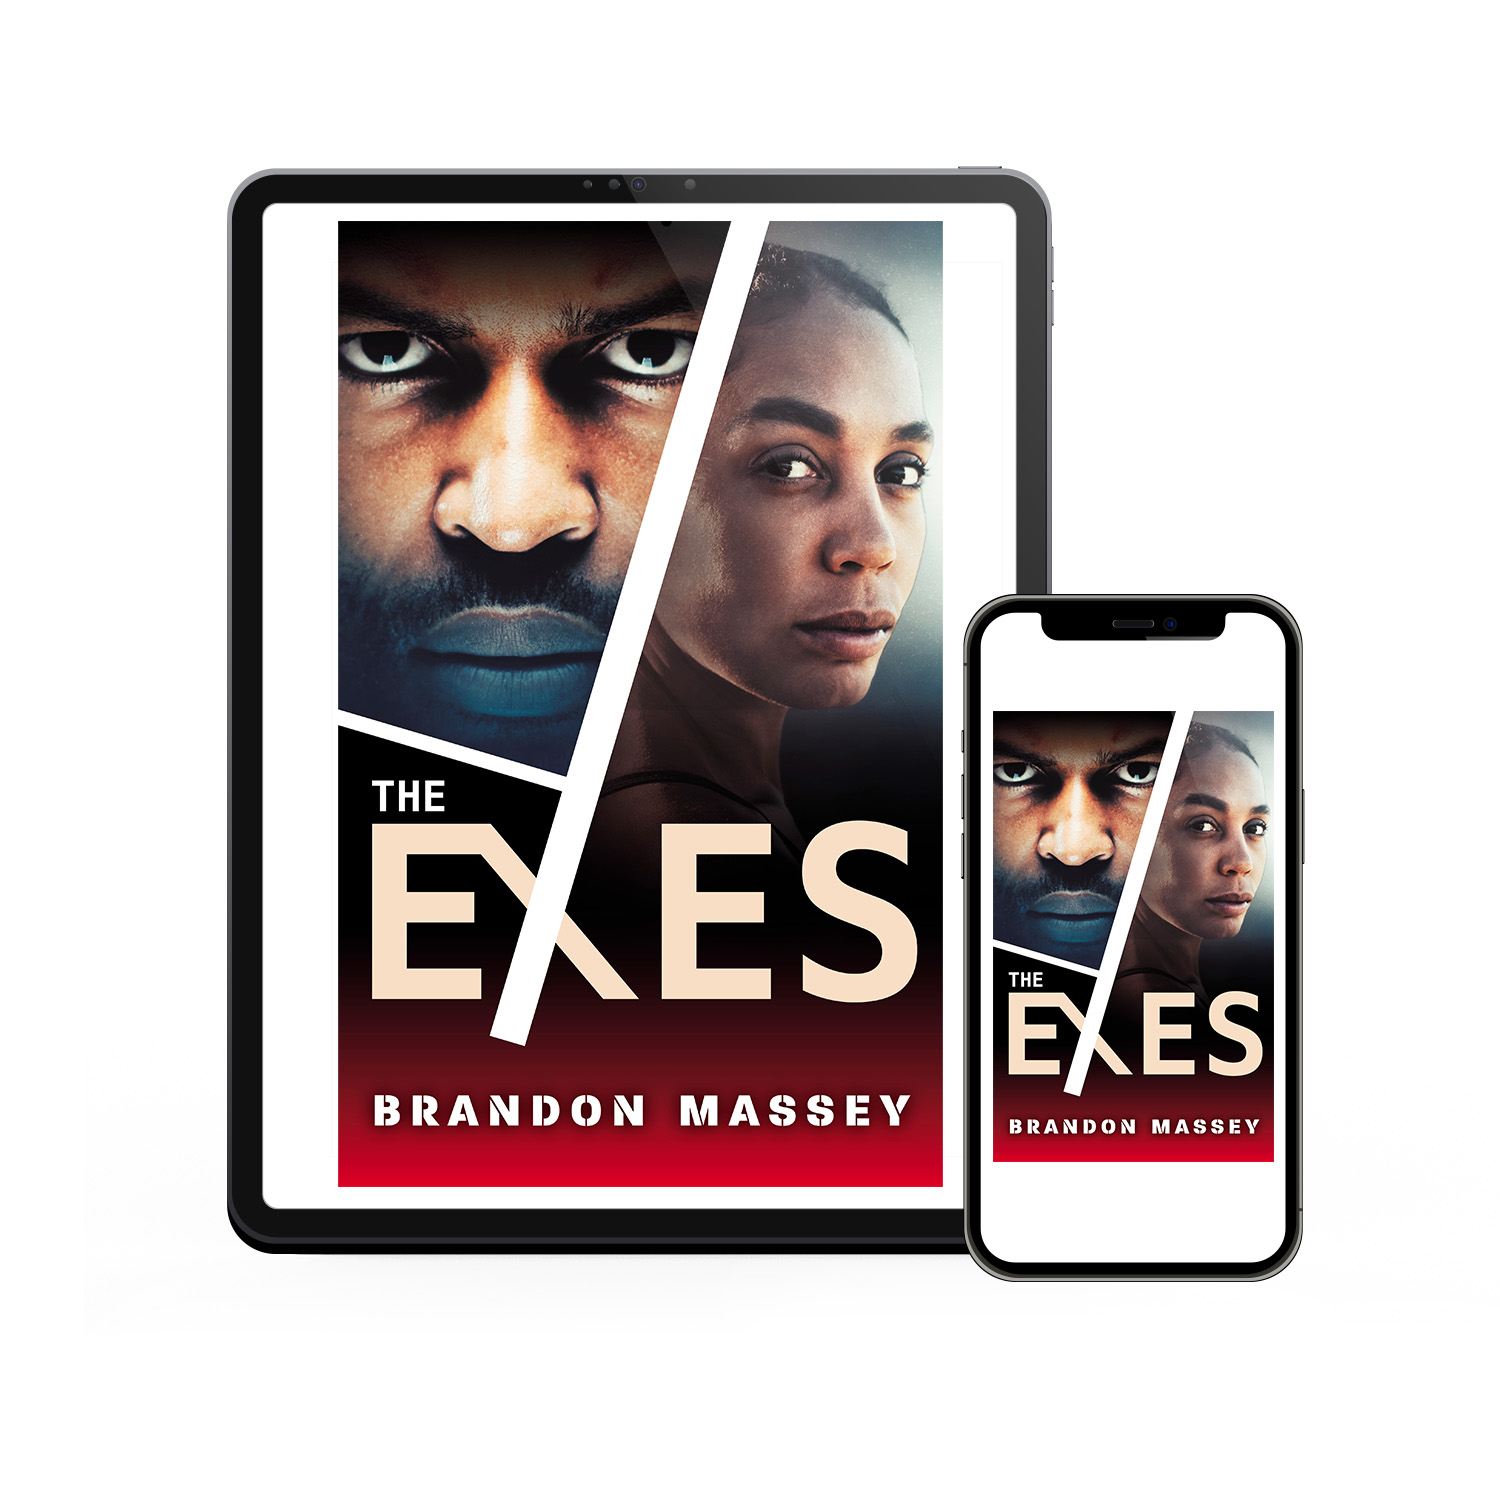 'The Exes' is a taut modern noir relationship thriller novel. The author is Brandon Massey. The book cover design & interior formatting are by Mark Thomas. To learn more about what Mark could do for your book, please visit coverness.com.